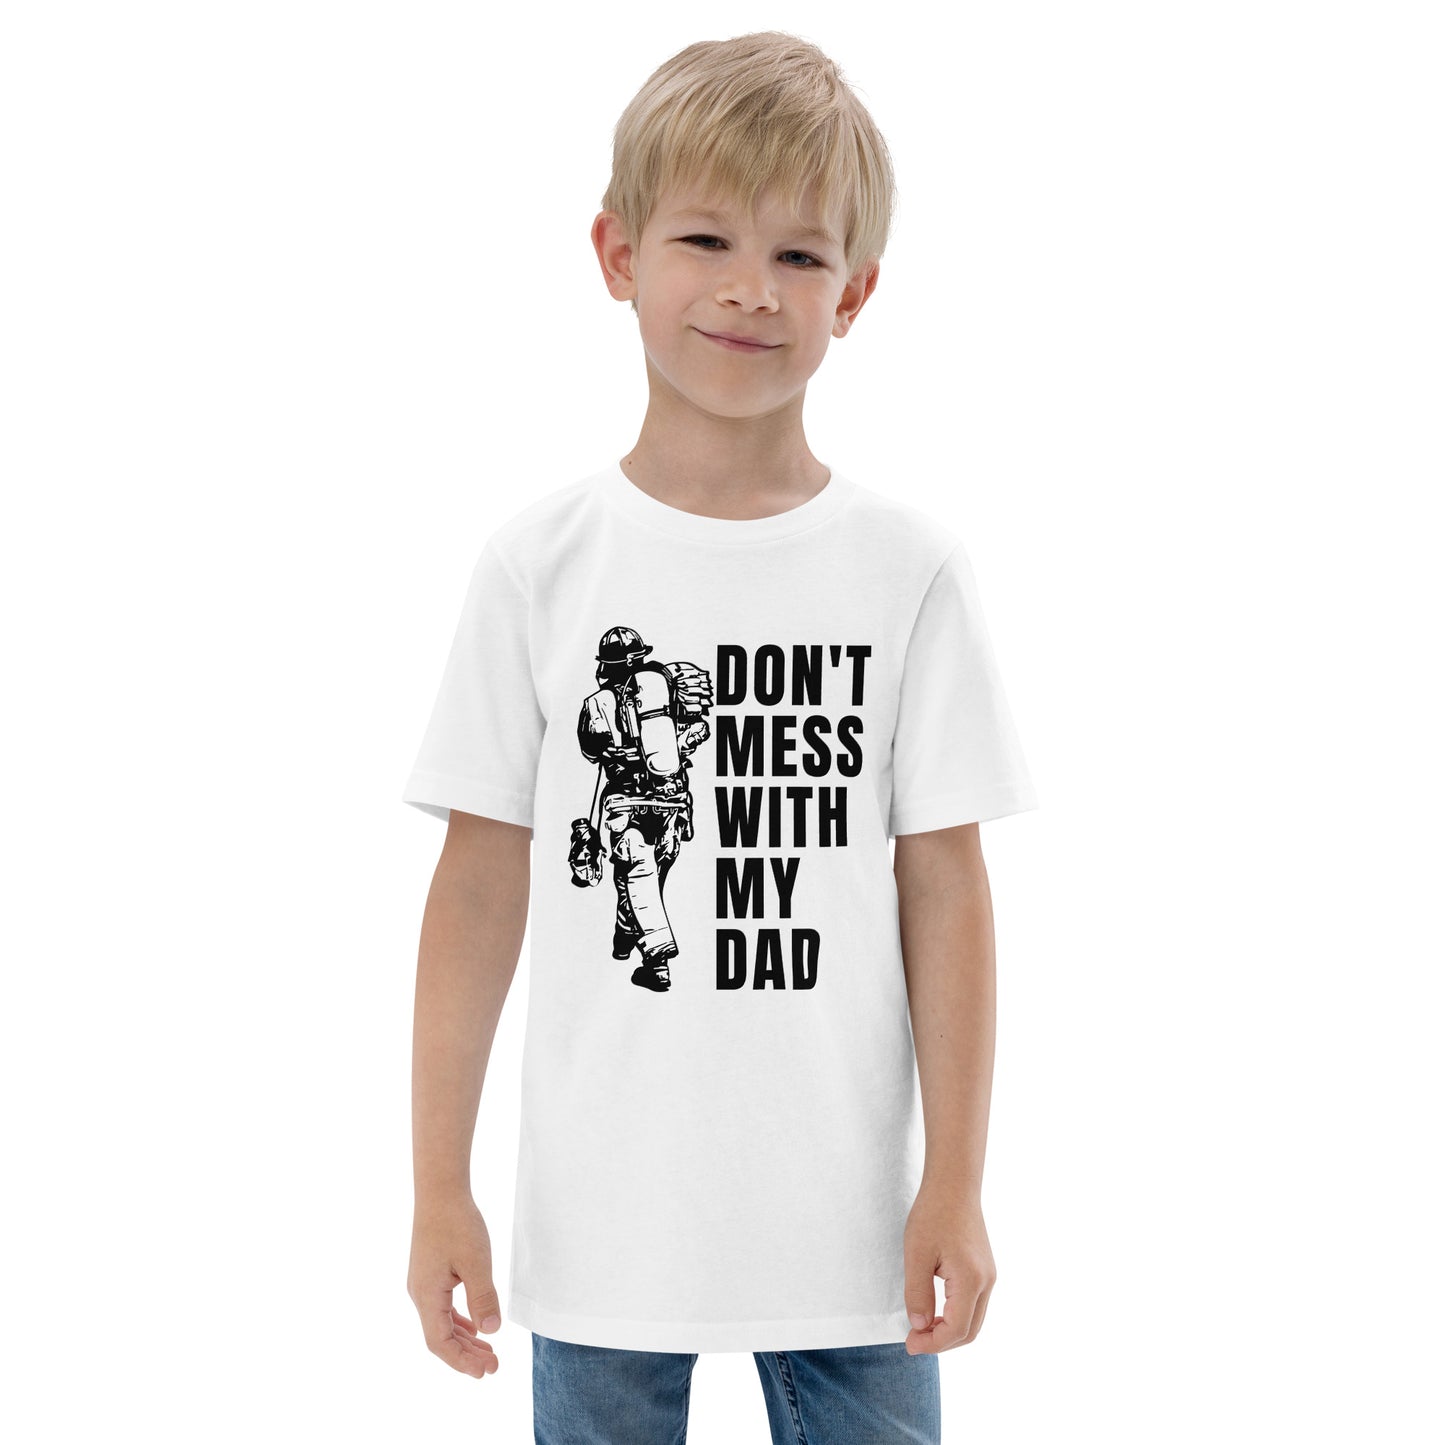 Kids Don't Mess with my Dad, Firefighter shirt. White youth shirt.